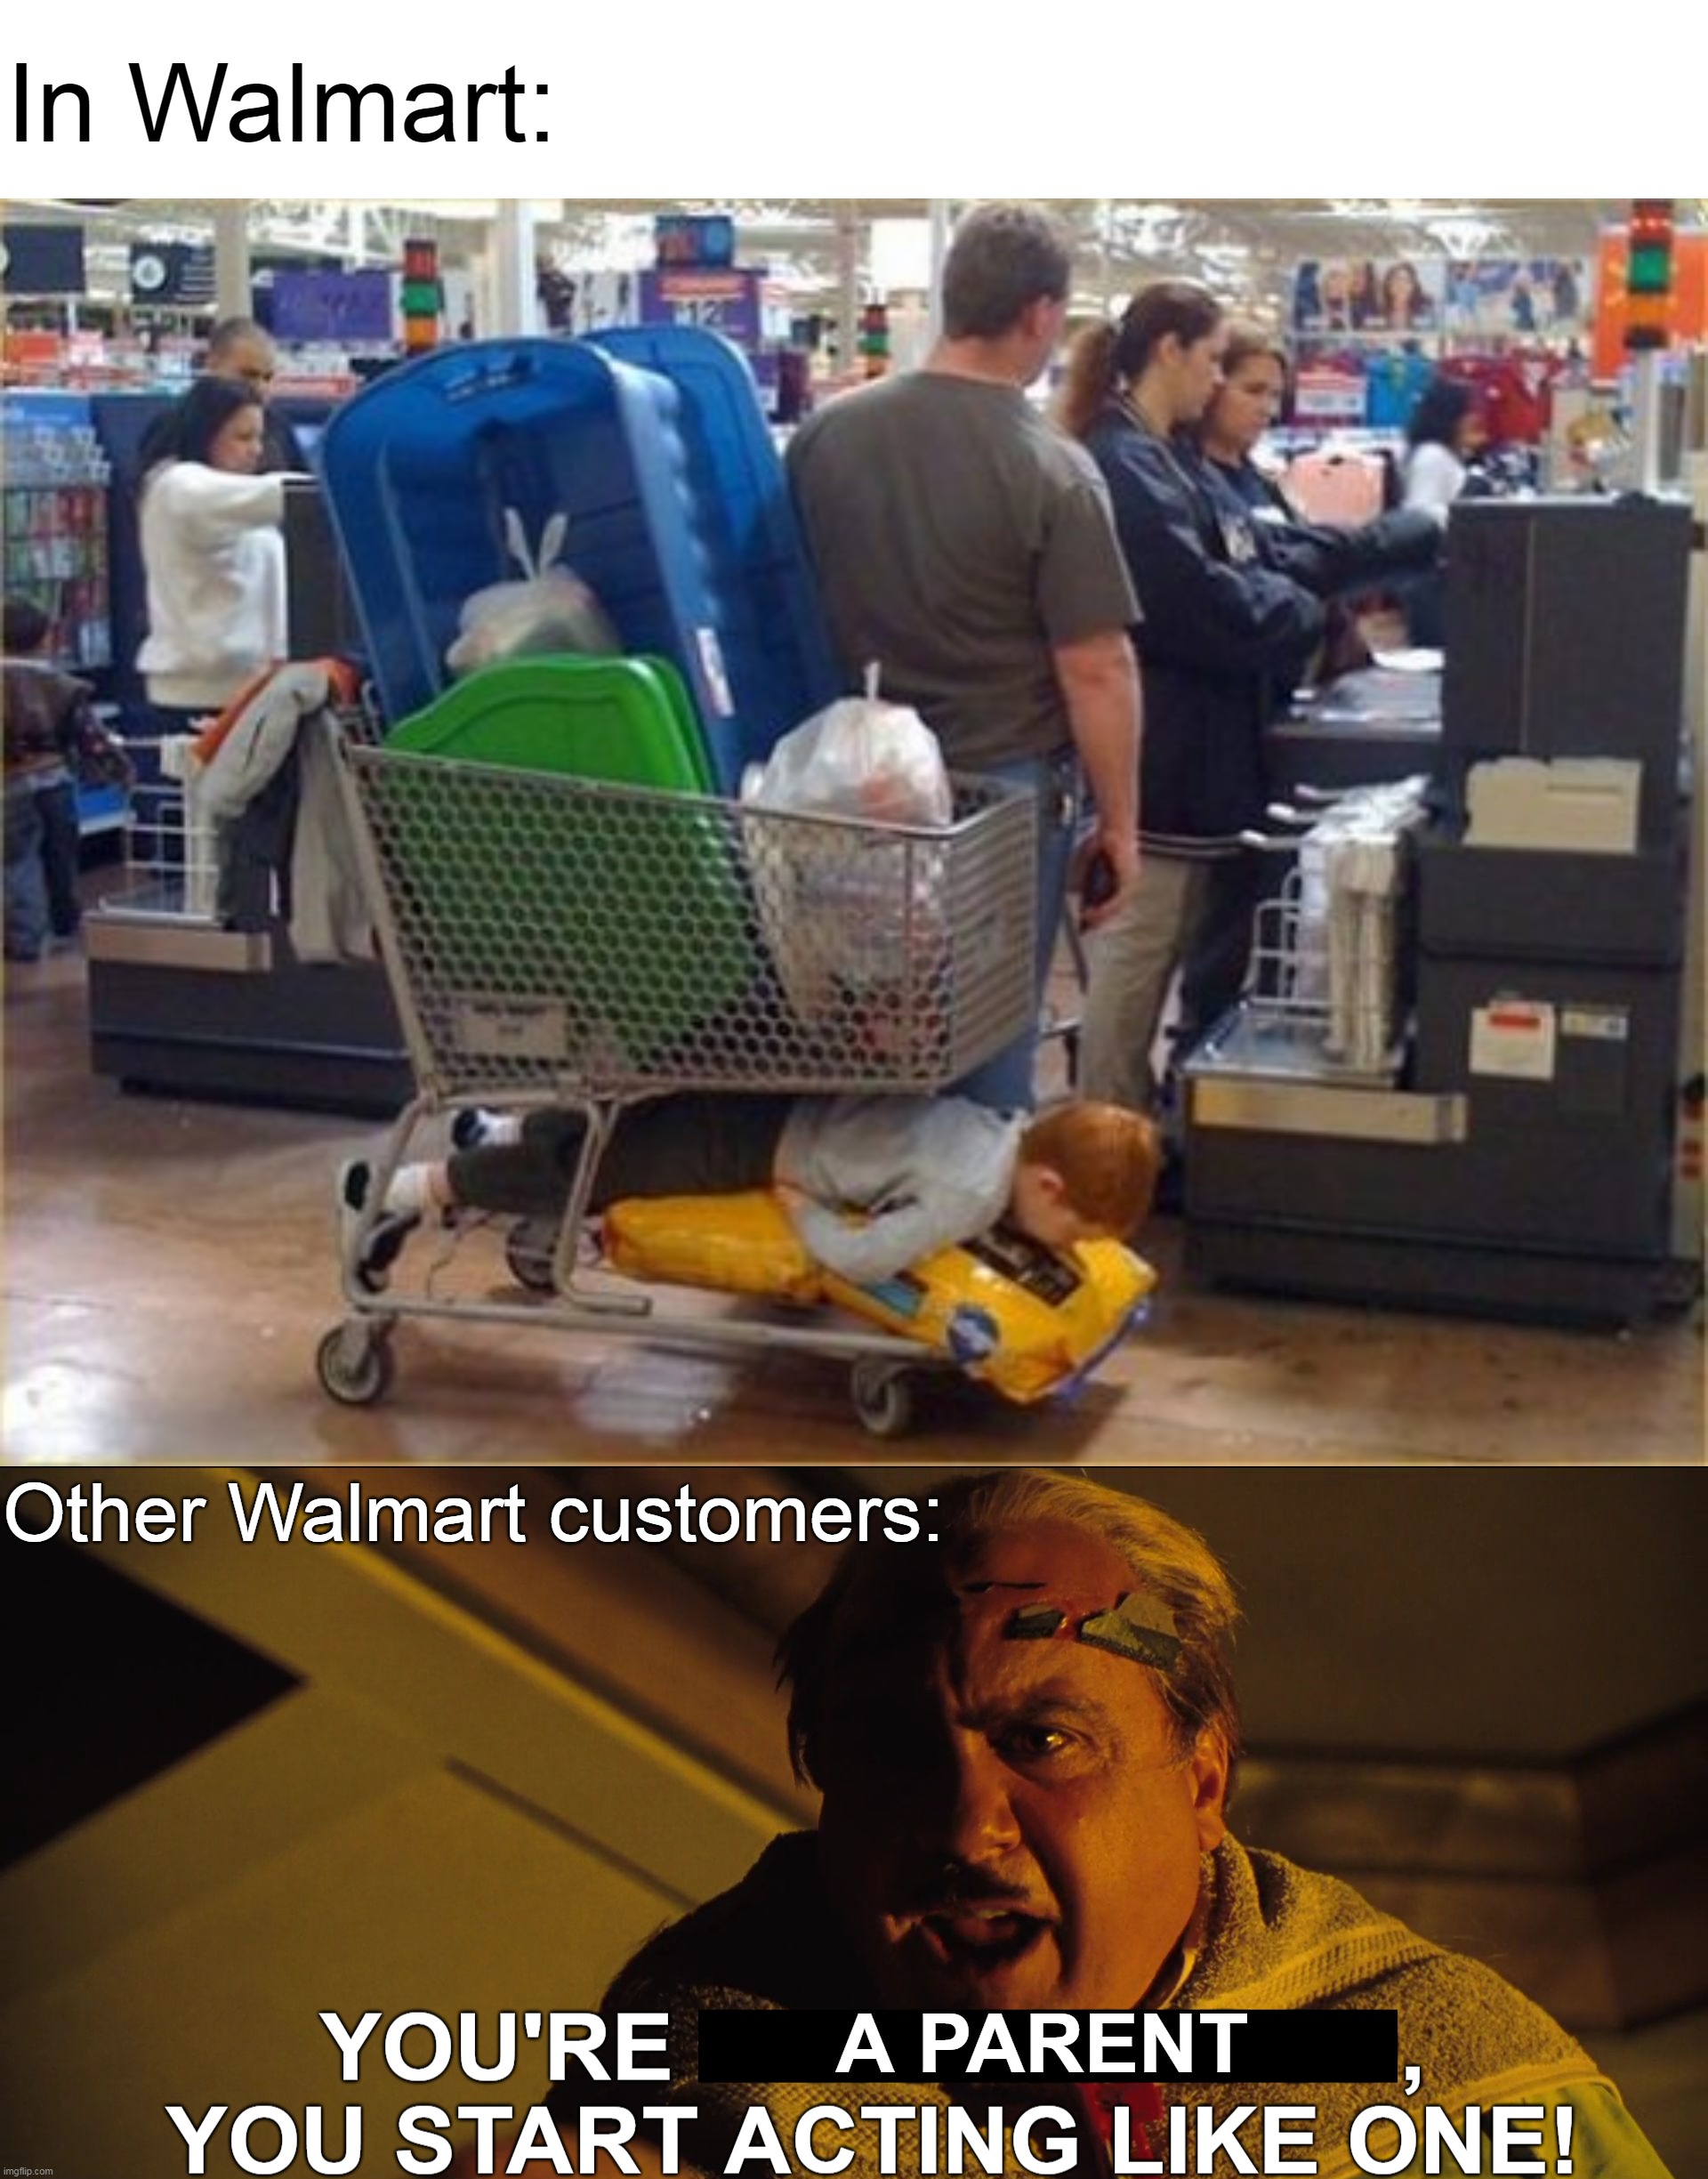 Really, Mister? |  In Walmart:; Other Walmart customers:; A PARENT | image tagged in you're blank you start acting like one,meme,memes,humor,parents,walmart | made w/ Imgflip meme maker